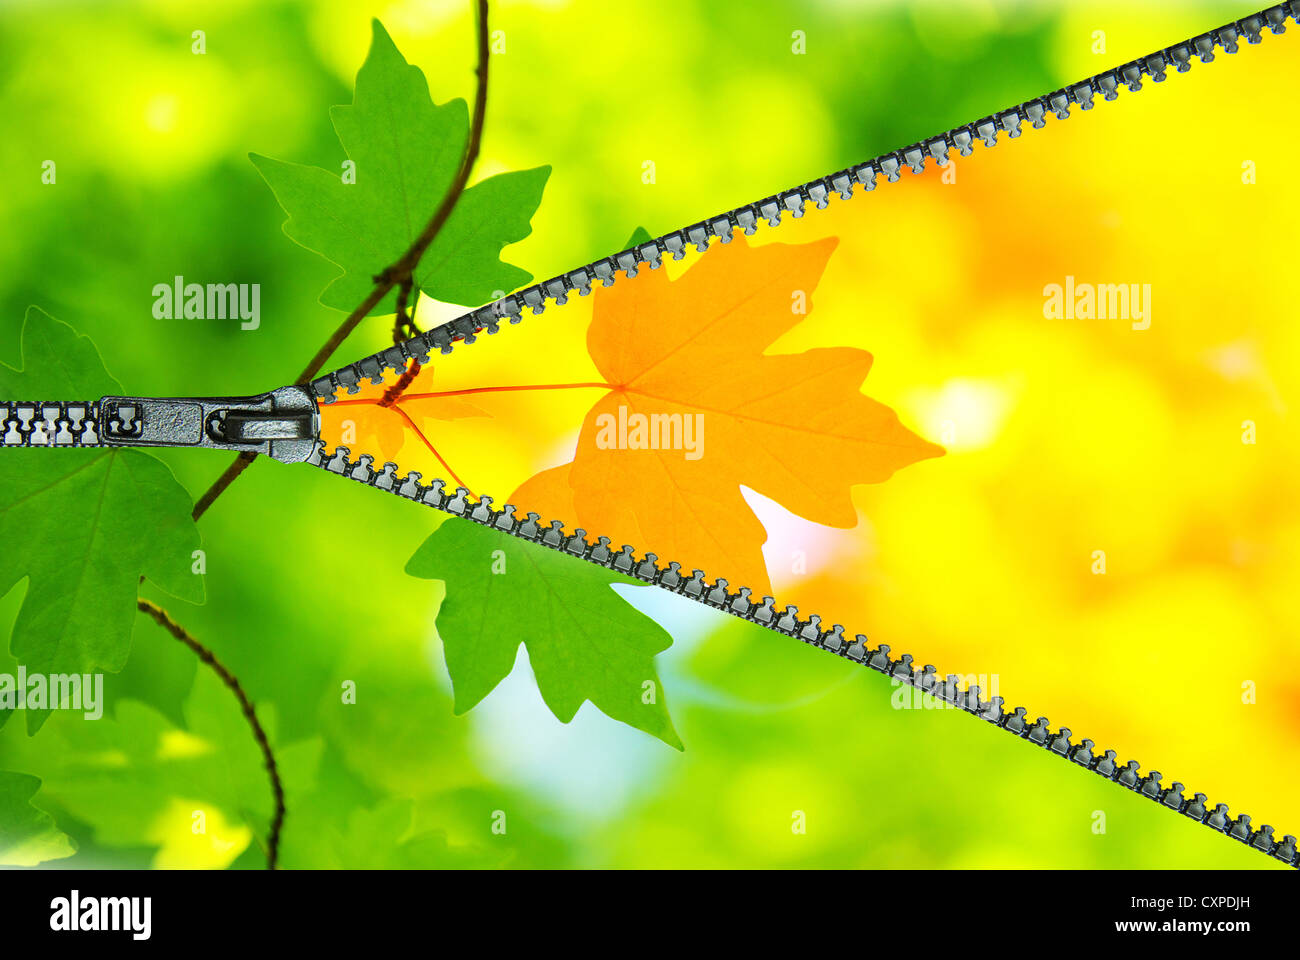 green leaves and autumn leaves background in sunny day Stock Photo